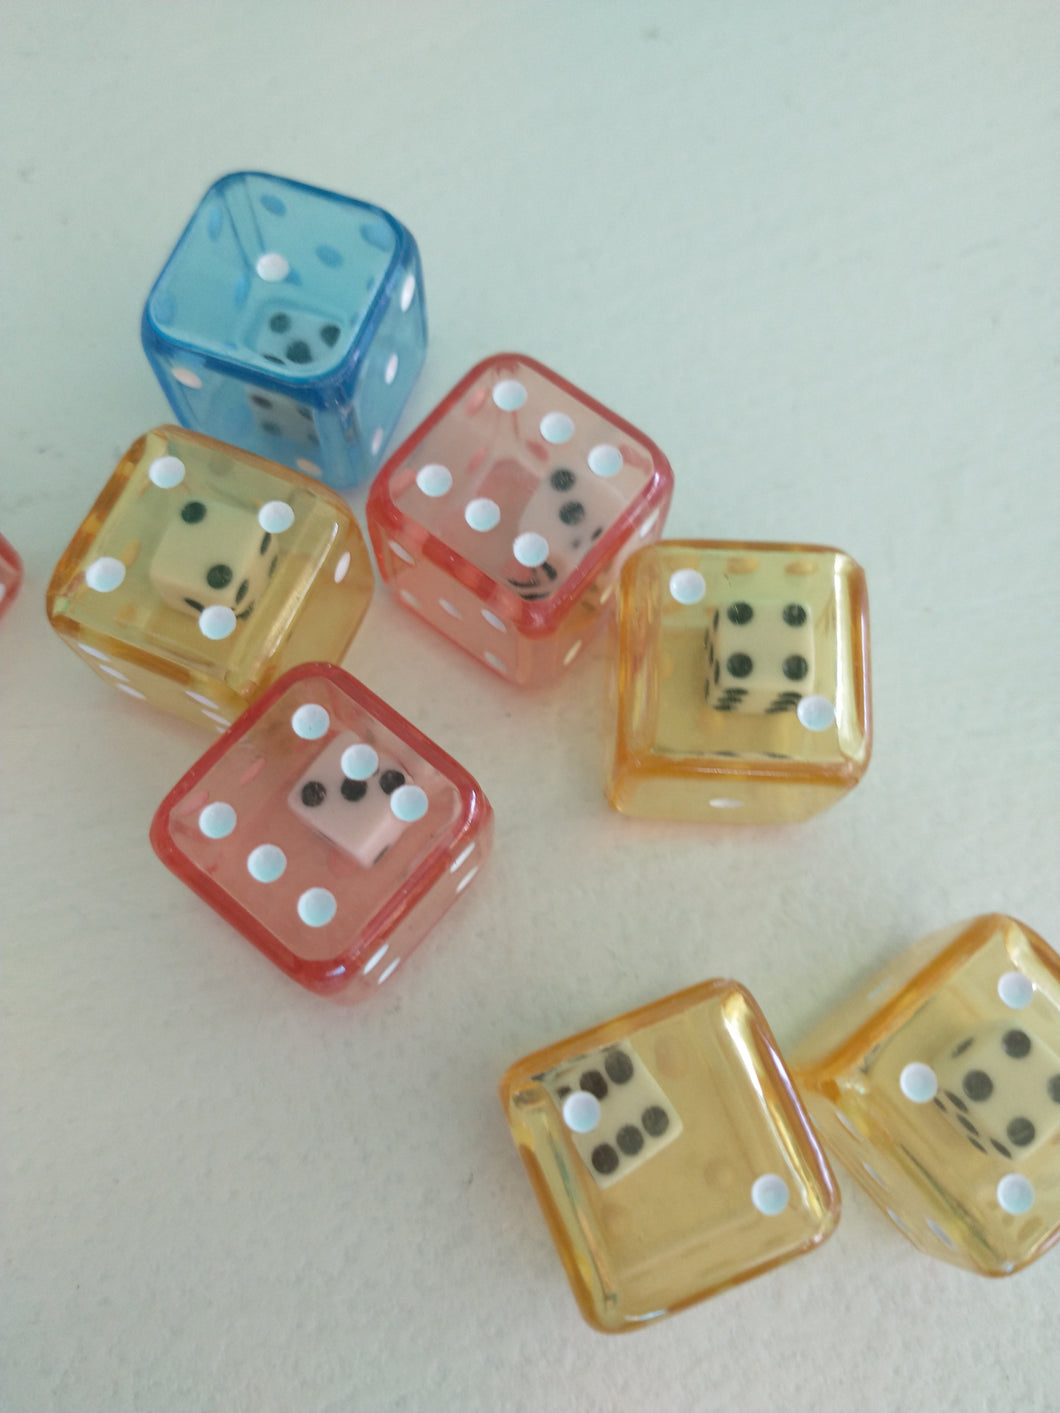 Double Dice - one 6 sided die